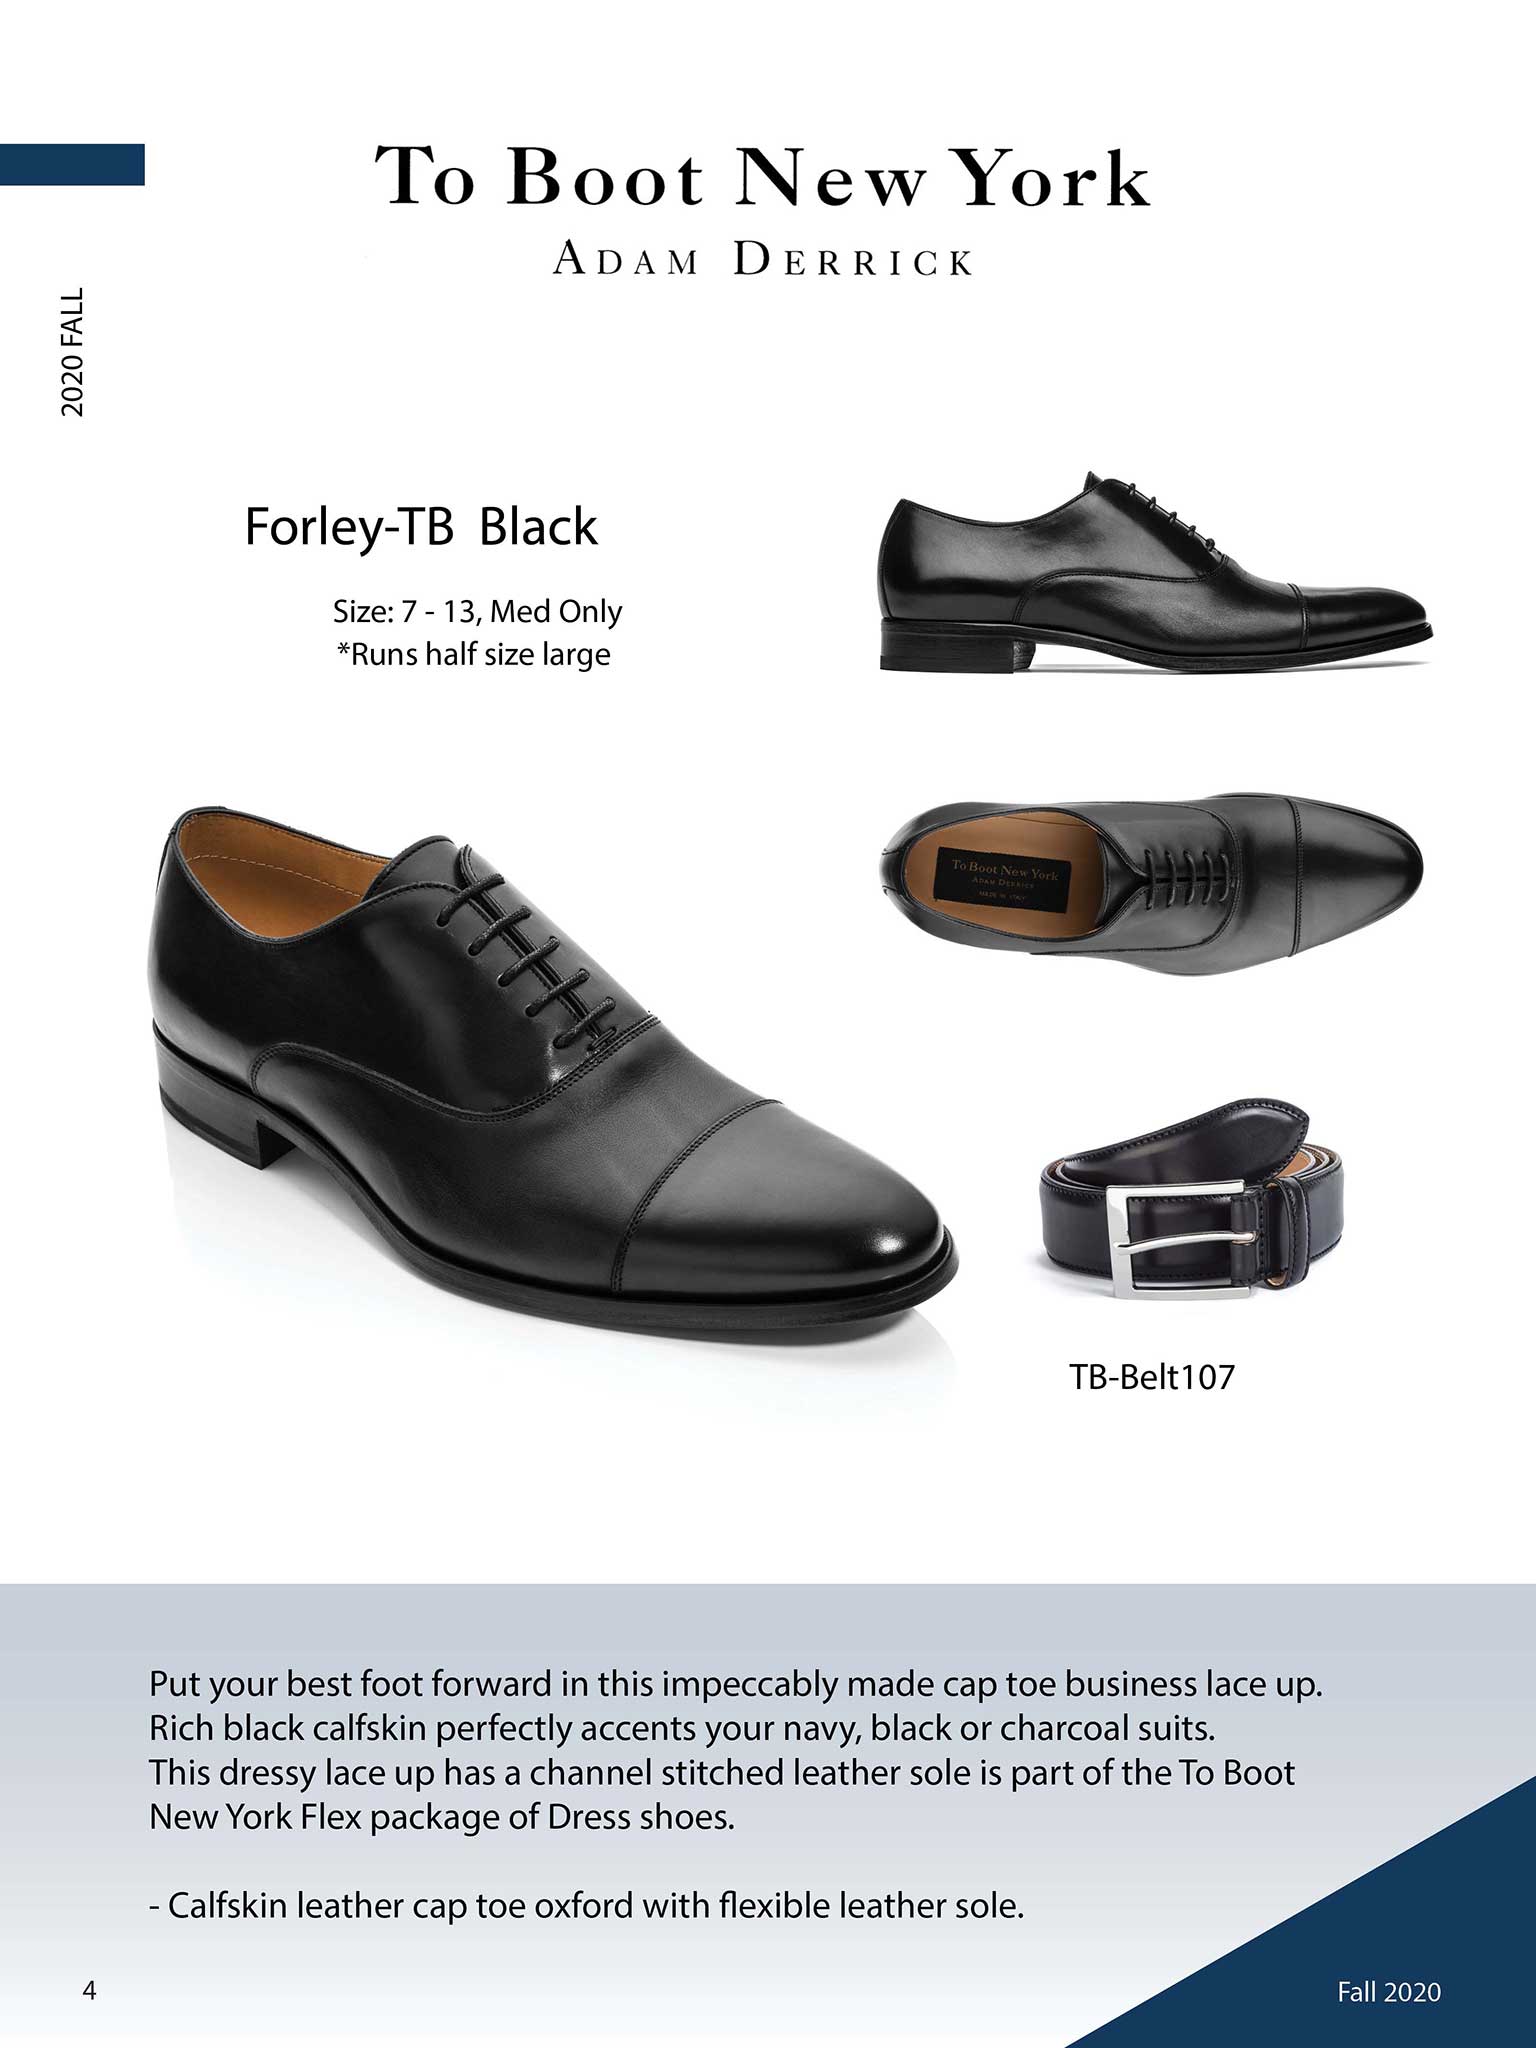 To Boot New York                                                                                                                                                                                                                                          , Forley in Black by To Boot New York